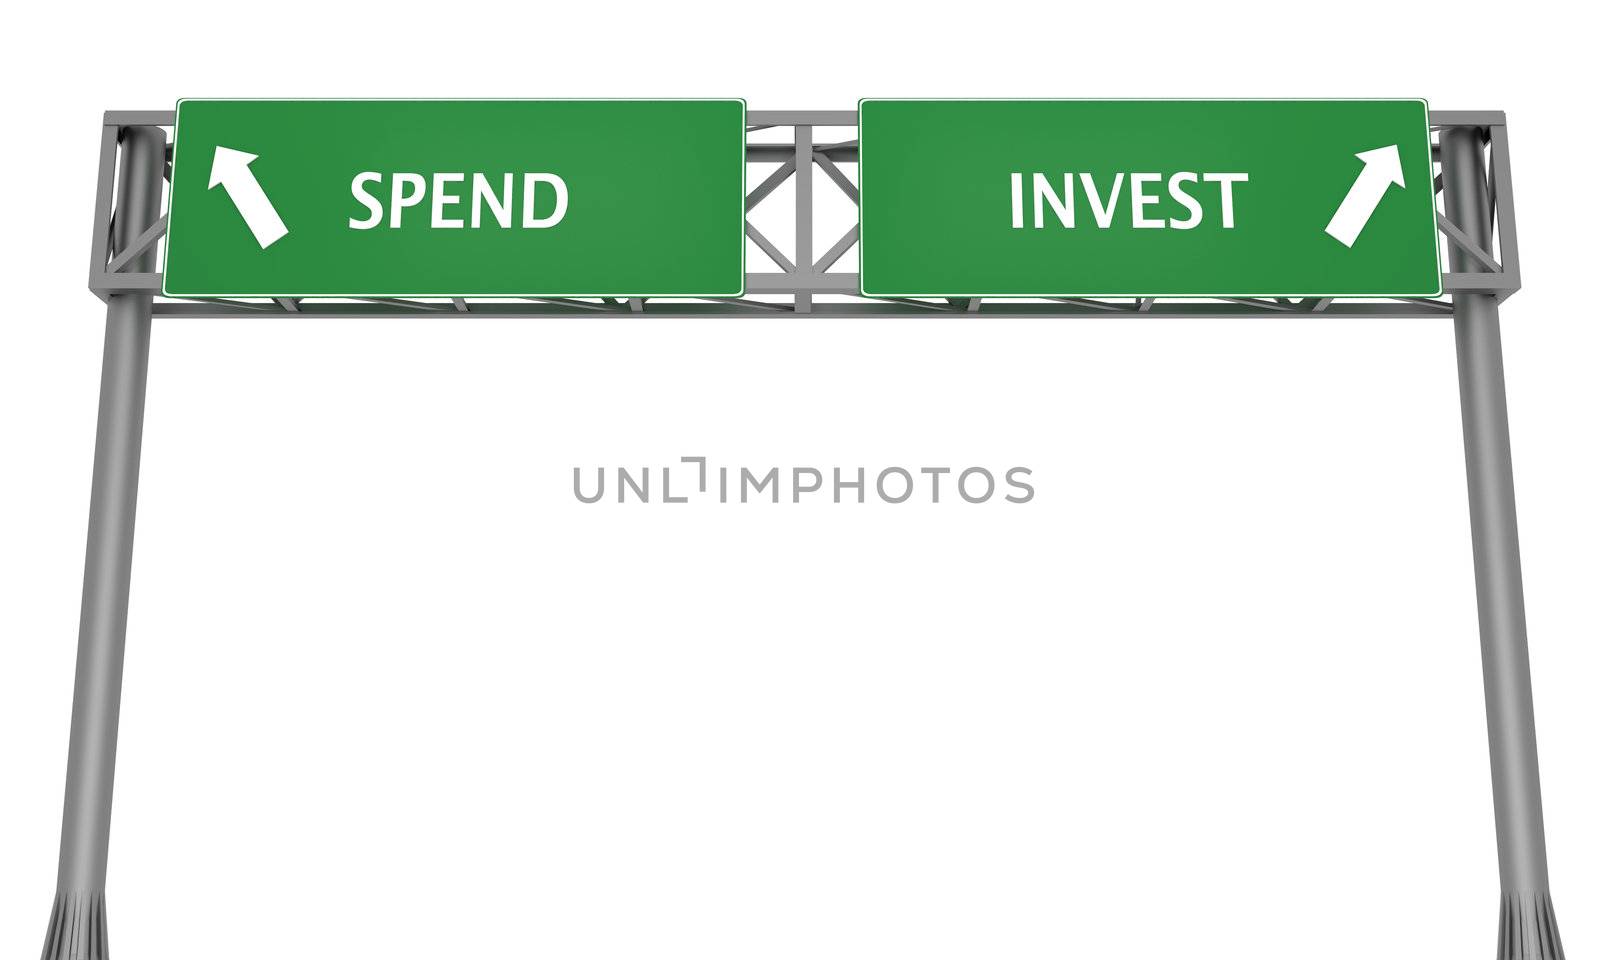 Spend or Invest by Harvepino